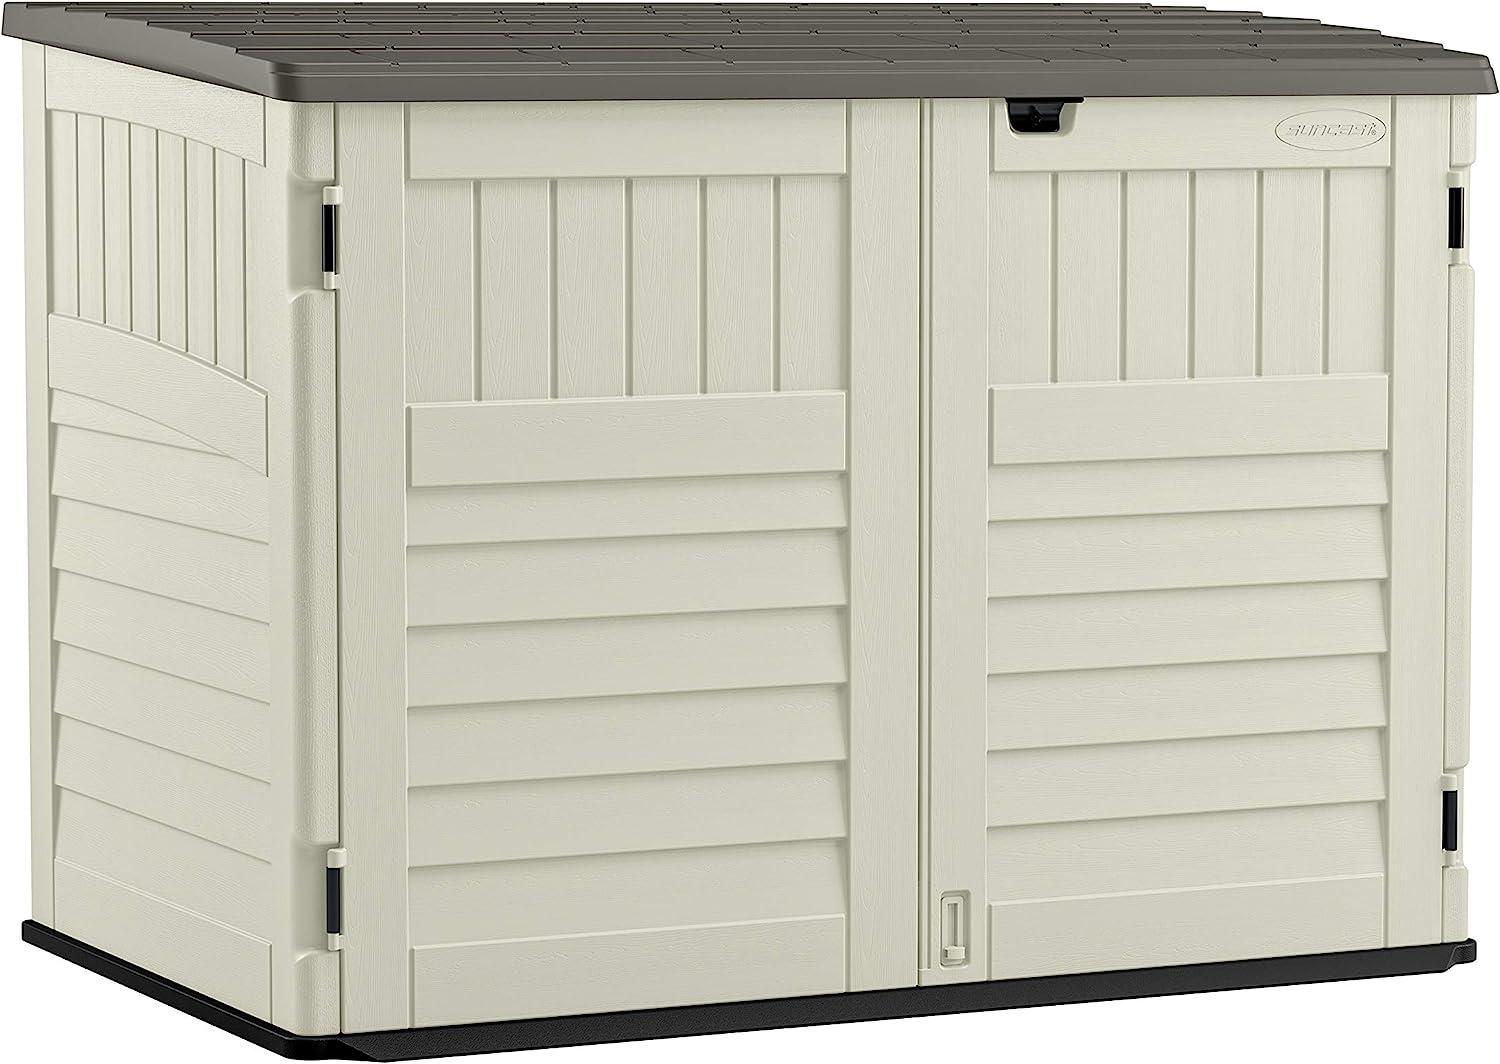 Suncast Horizontal Stow-Away Storage Shed for $231.53 Shipped